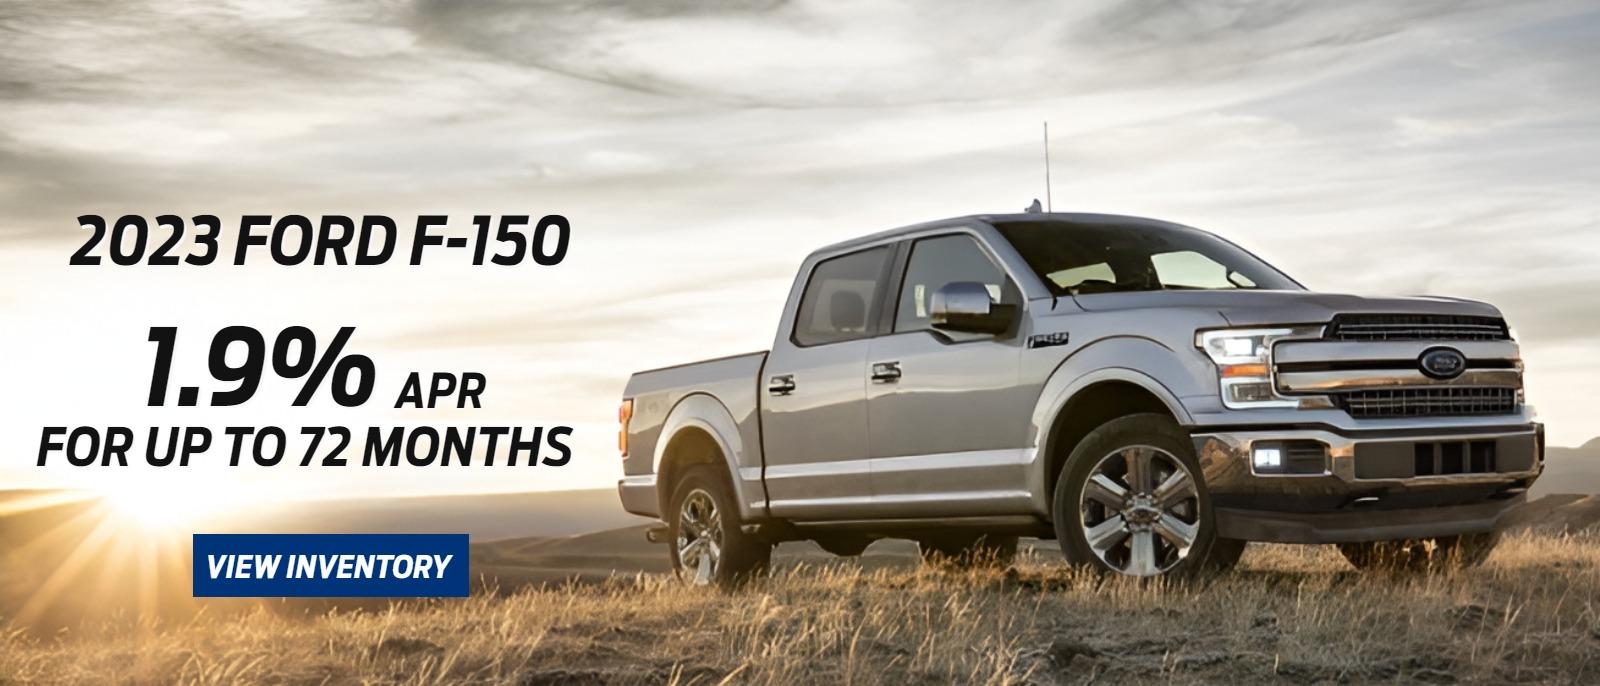 2023 Ford F-150: 1.9% APR for 72 Months